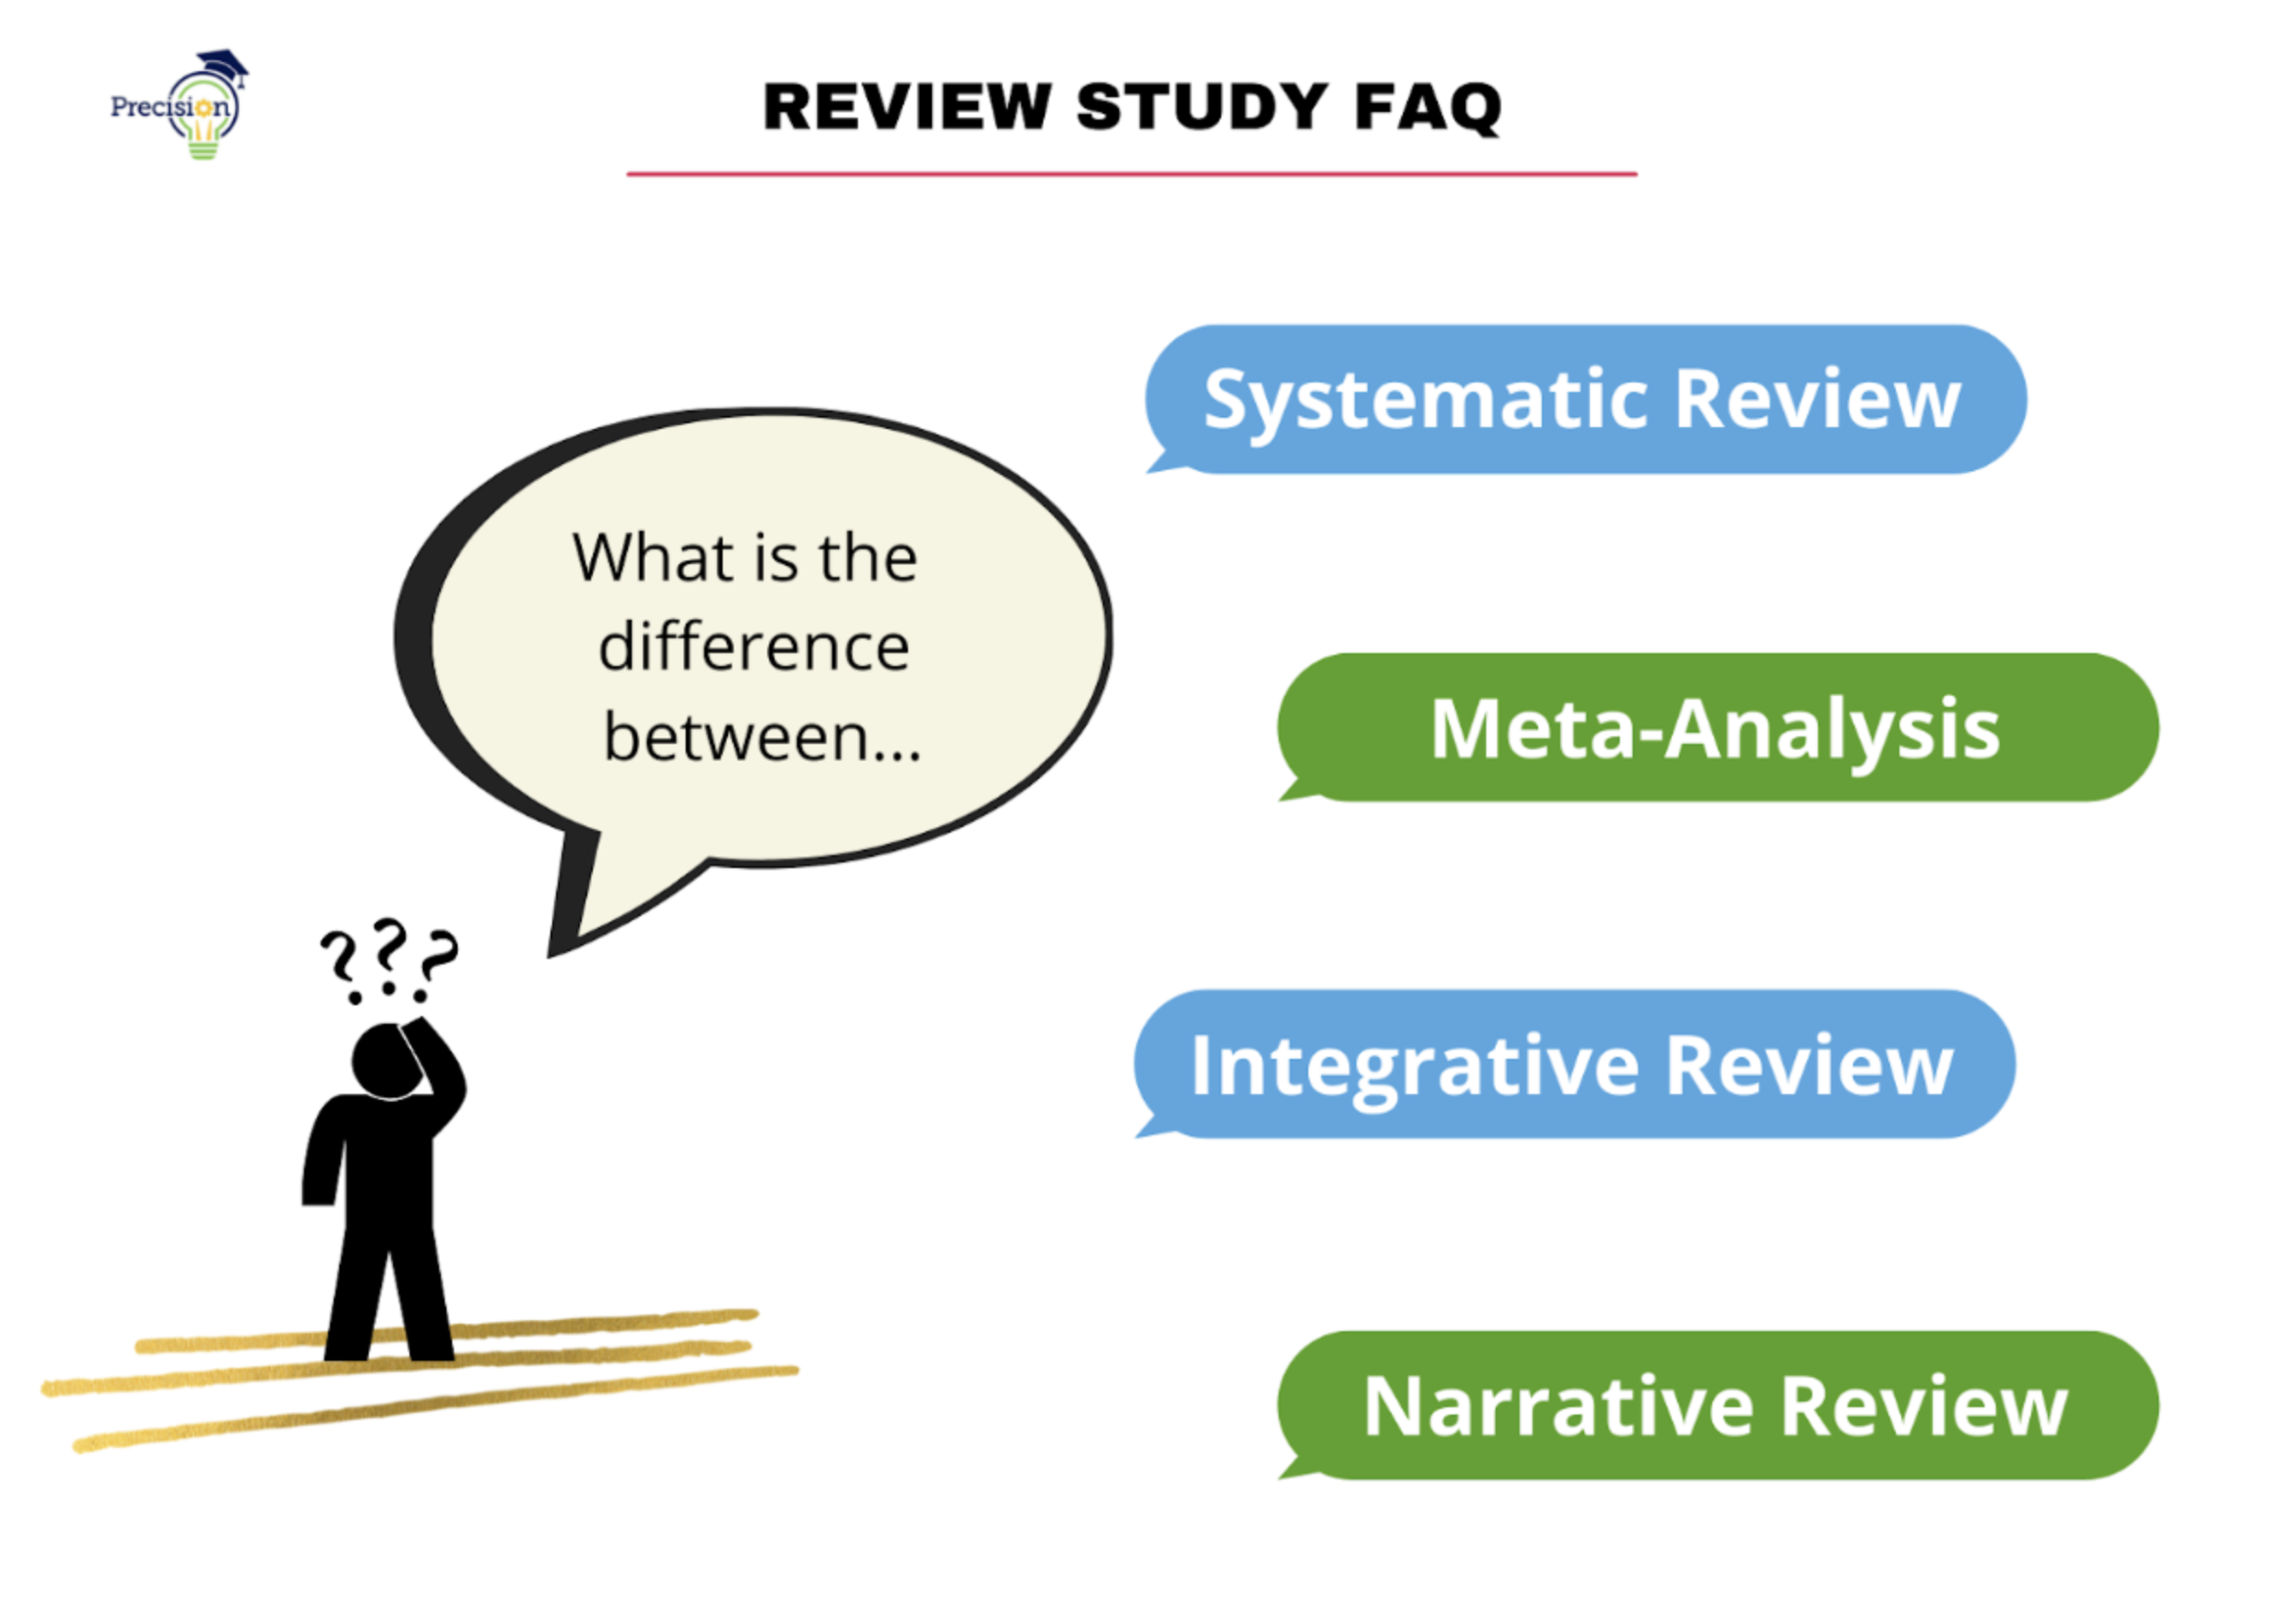 Systematic Reviews and Meta-Analyses